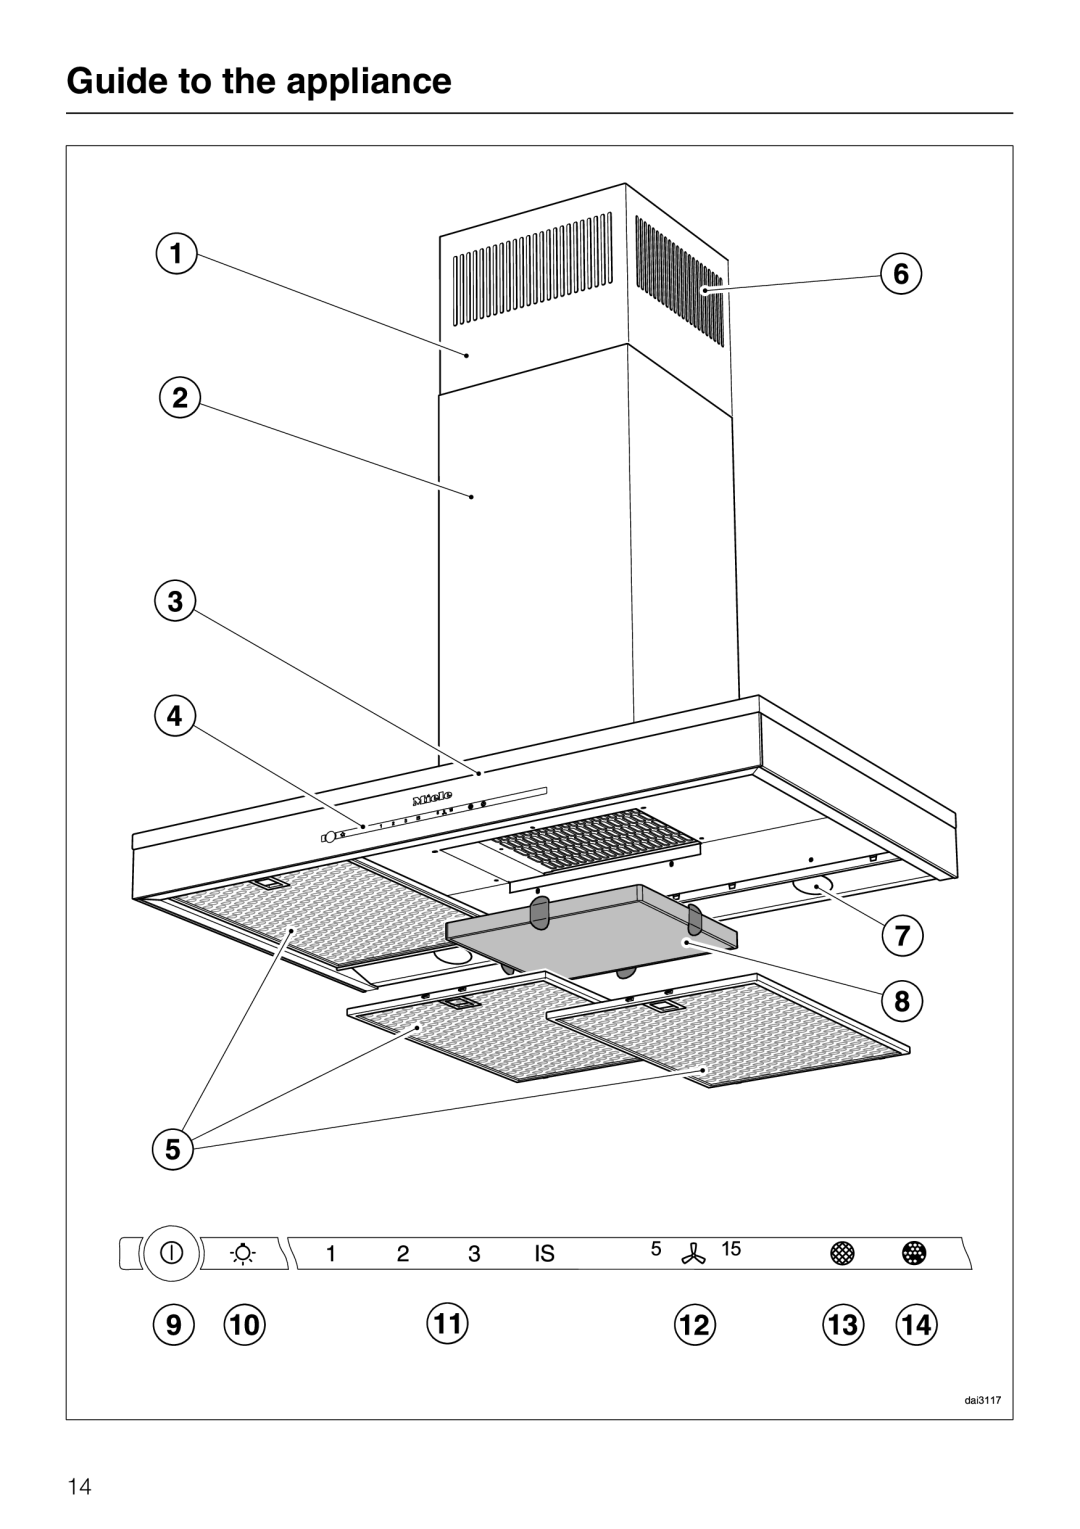 Miele 09 730 840 installation instructions Guide to the appliance 